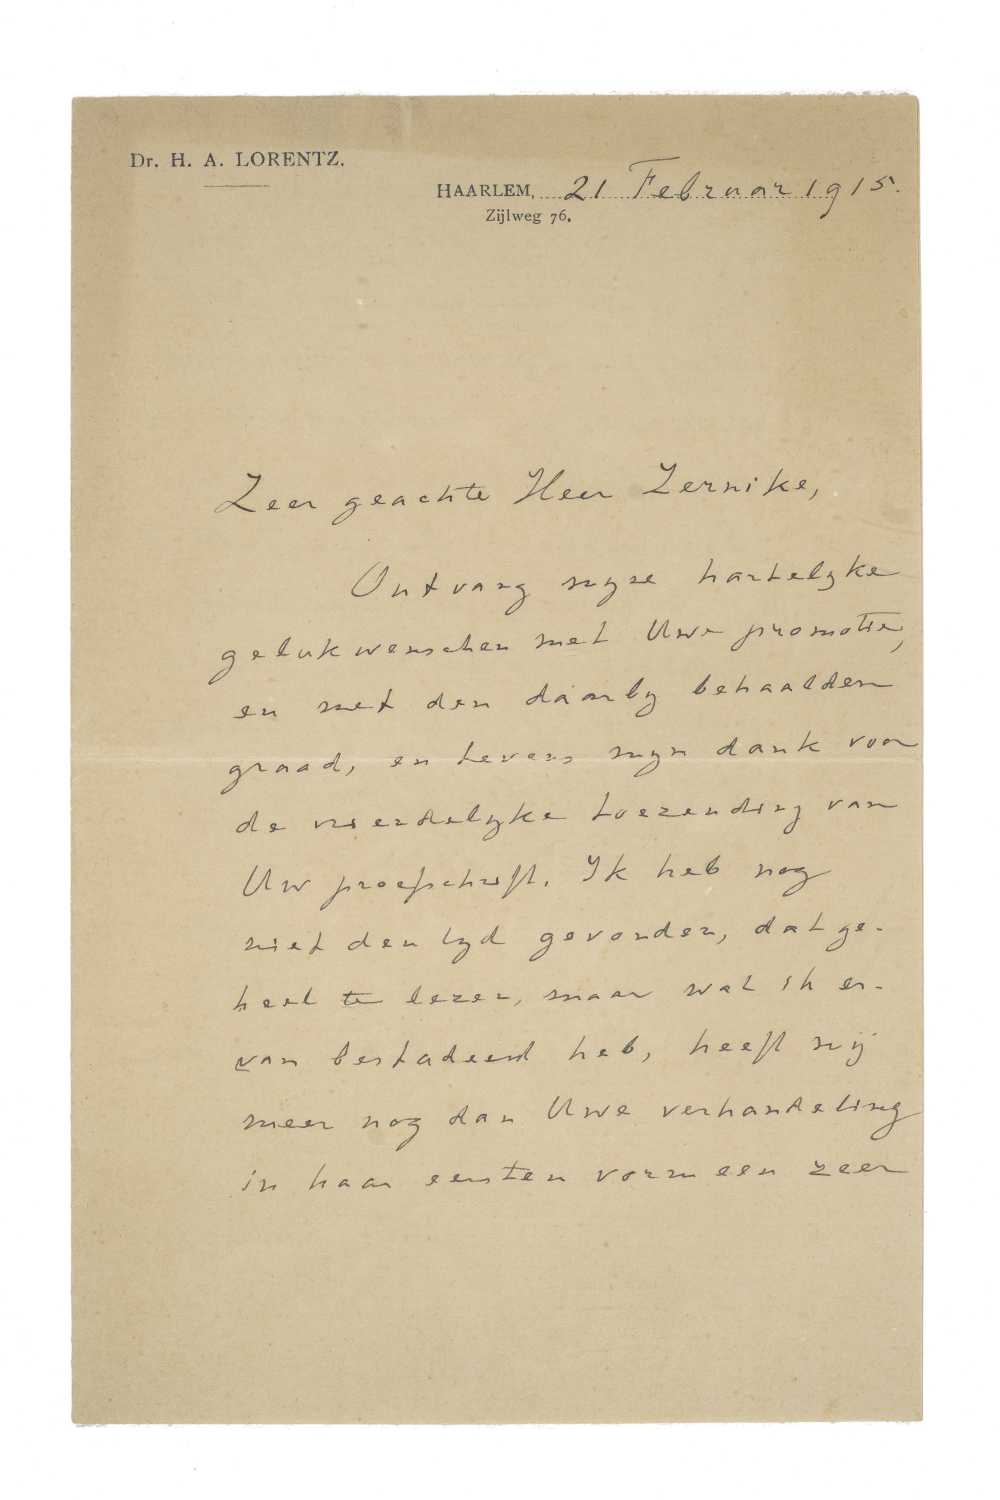 The letter of H.A. Lorentz to Frits Zernike. [Dated 21 February 1915]